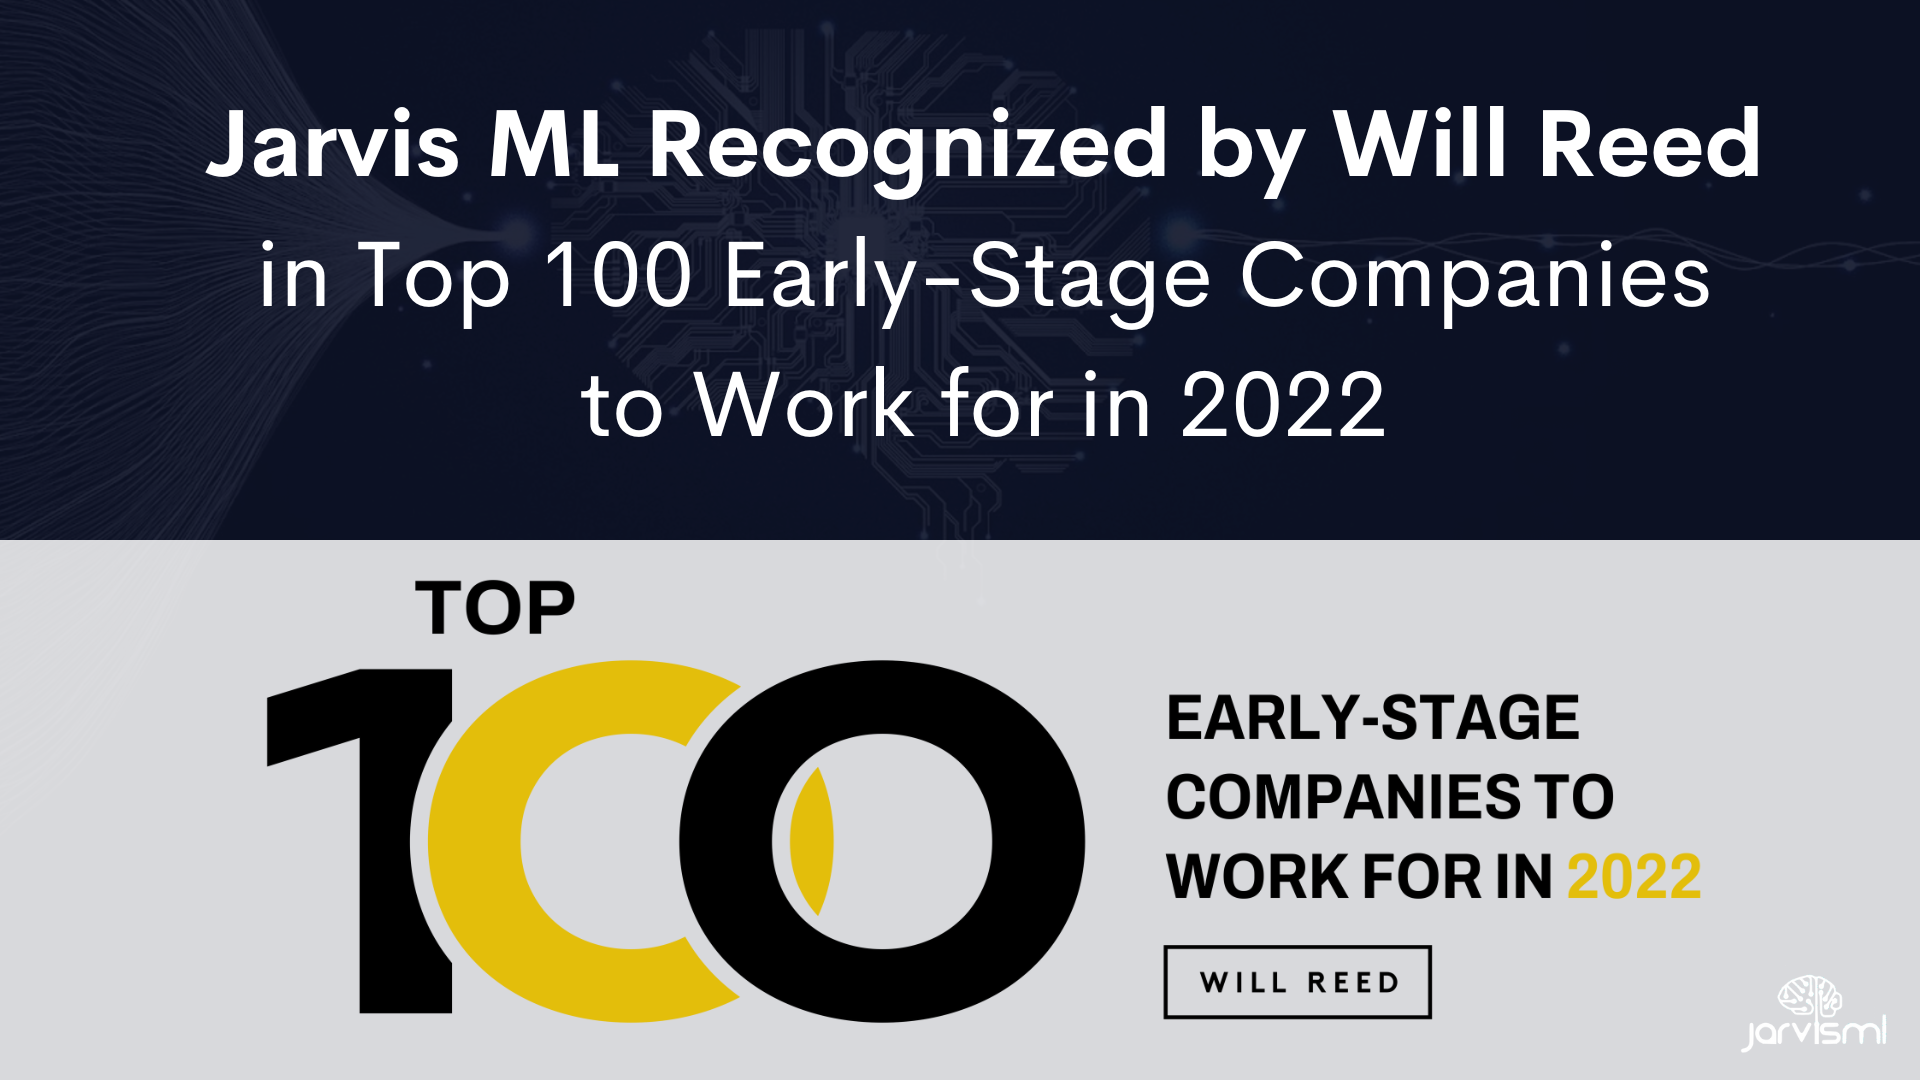 Jarvis ML Named Top 100 Early-Stage Company to Work For in 2022